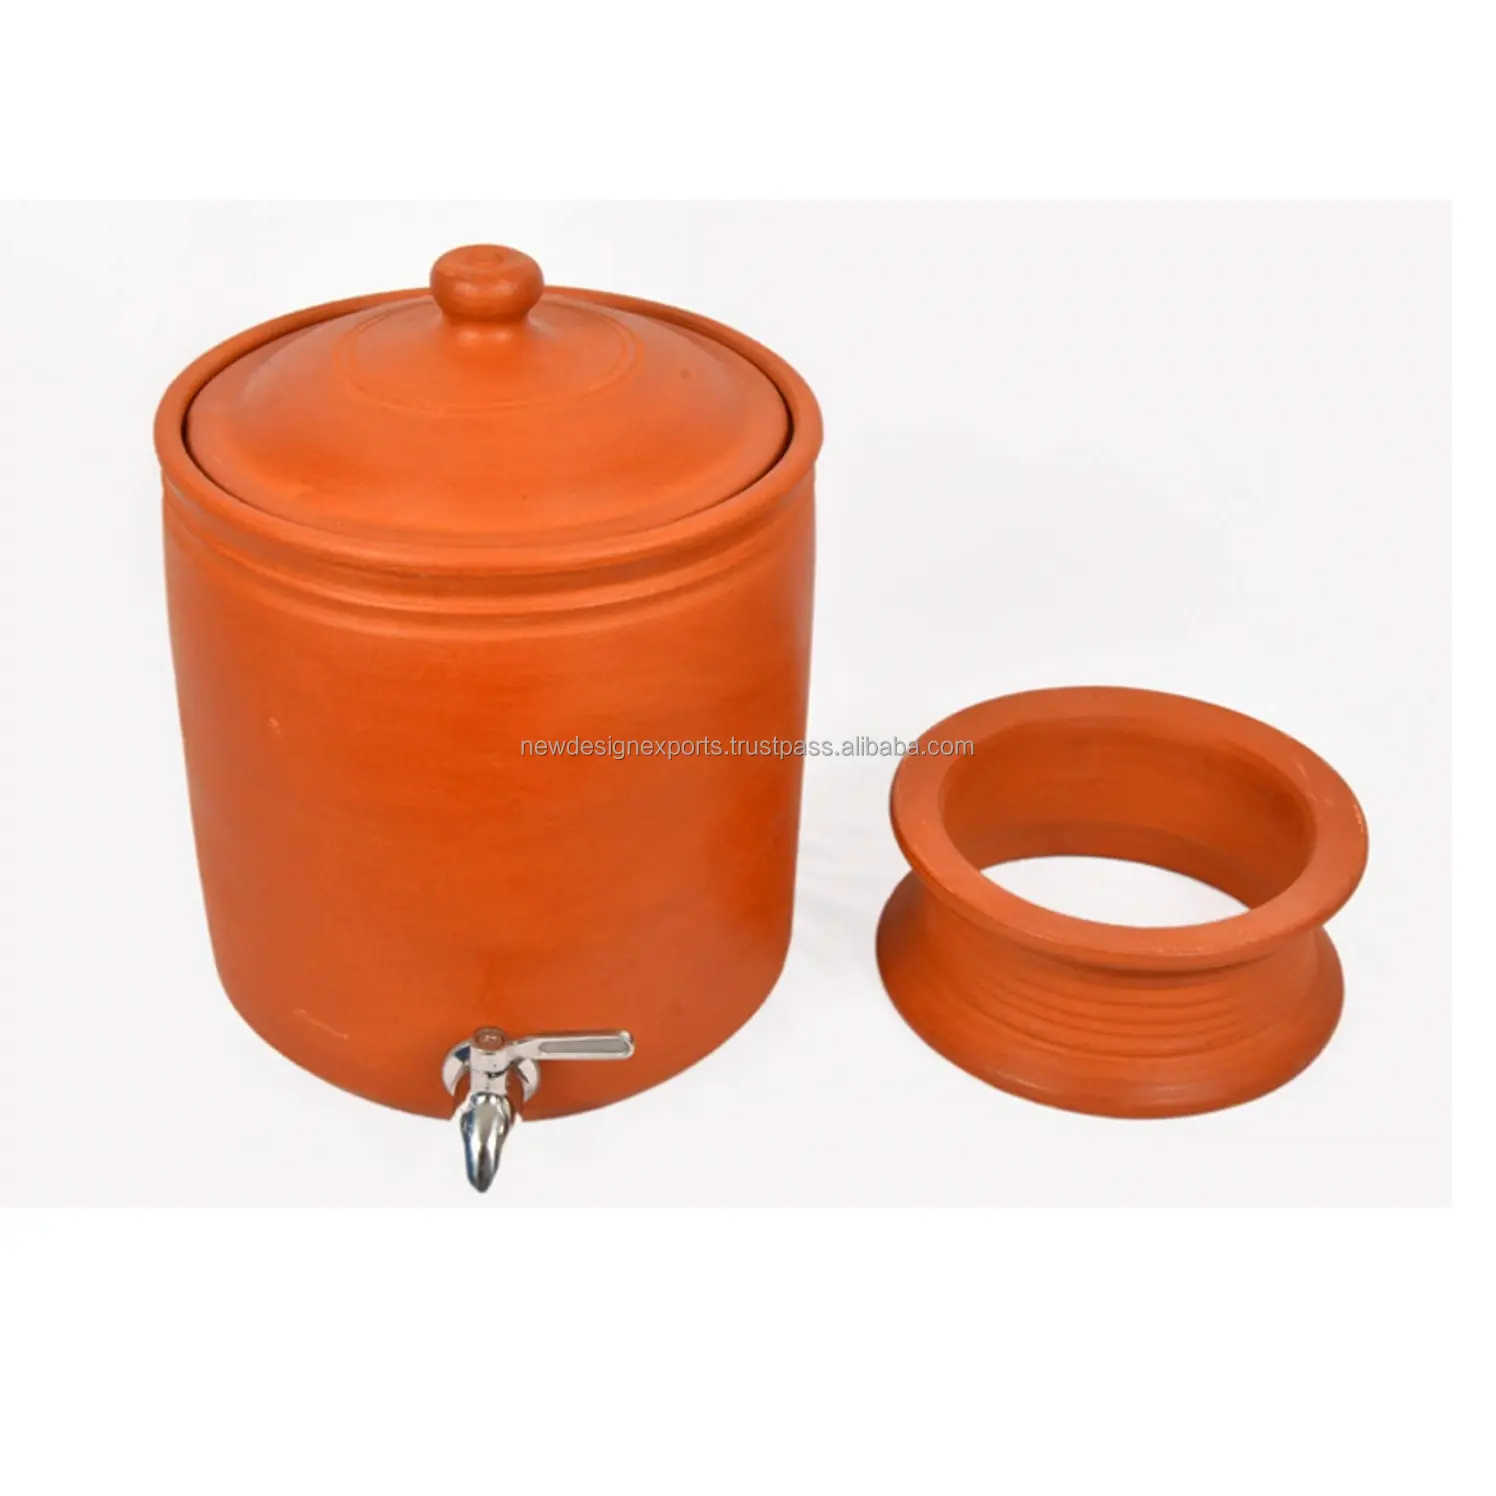 Handmade Earthen Clay water pot with Lid